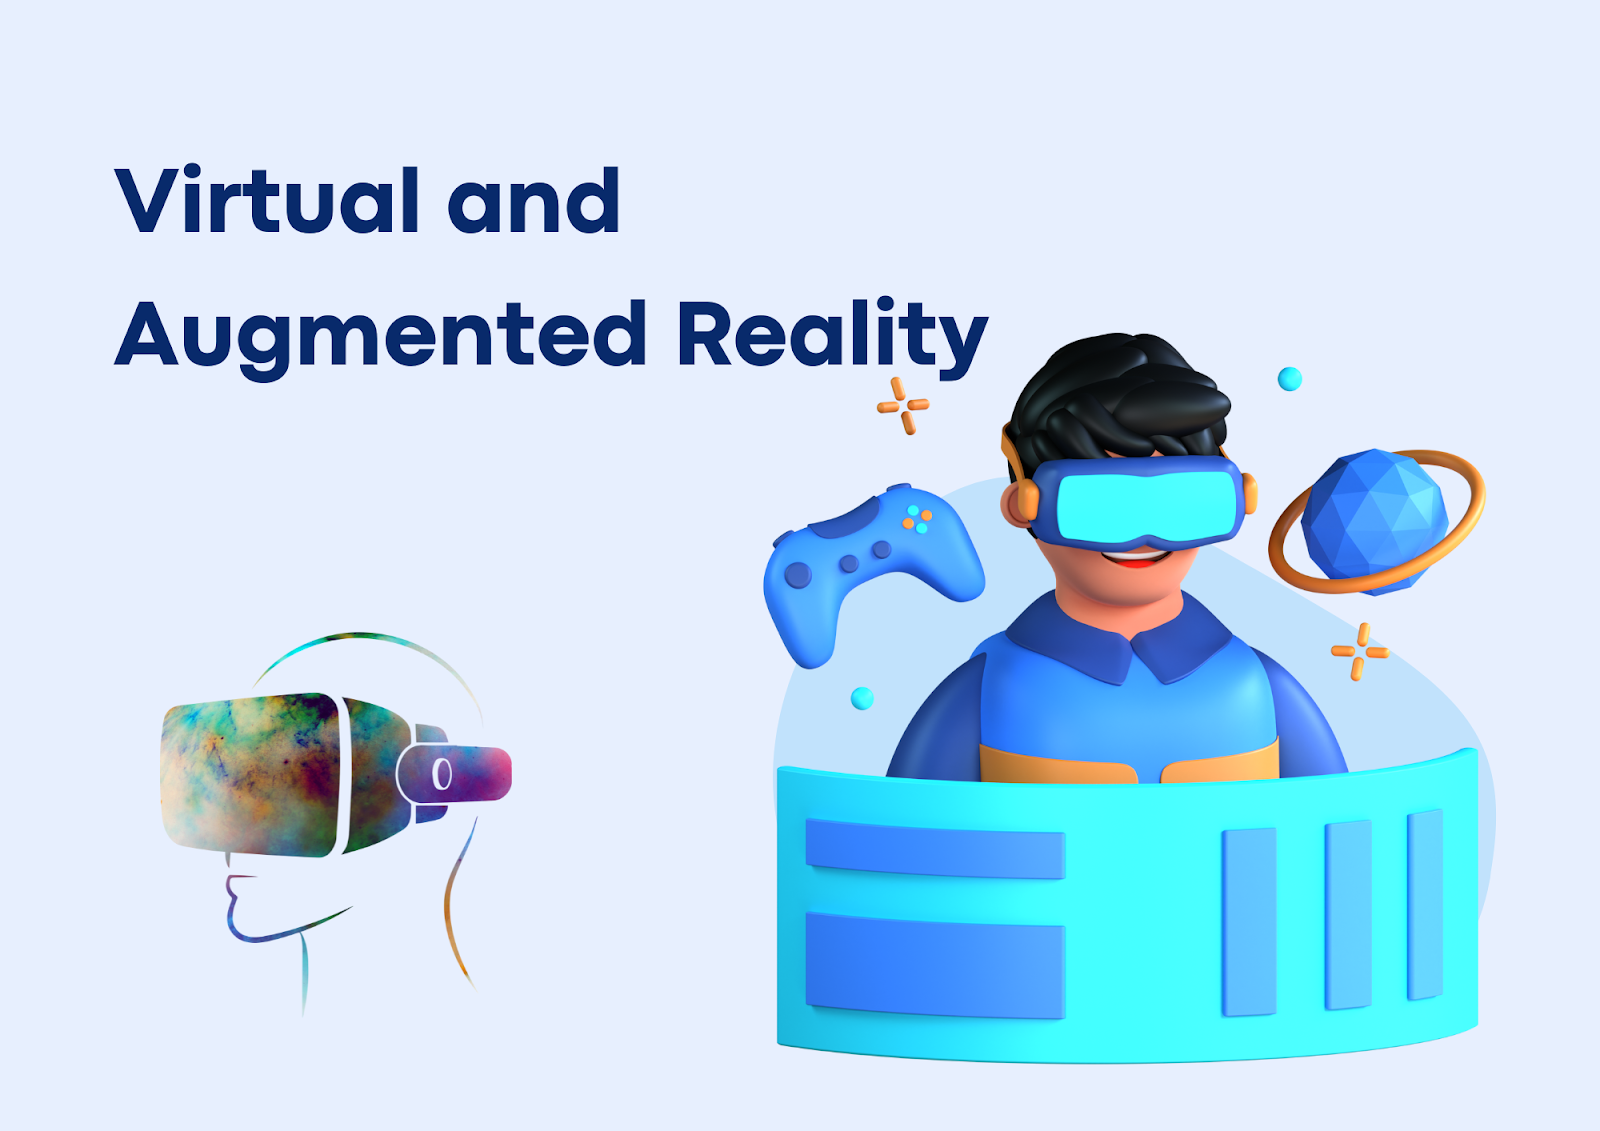 Virtual and Augmented Reality
